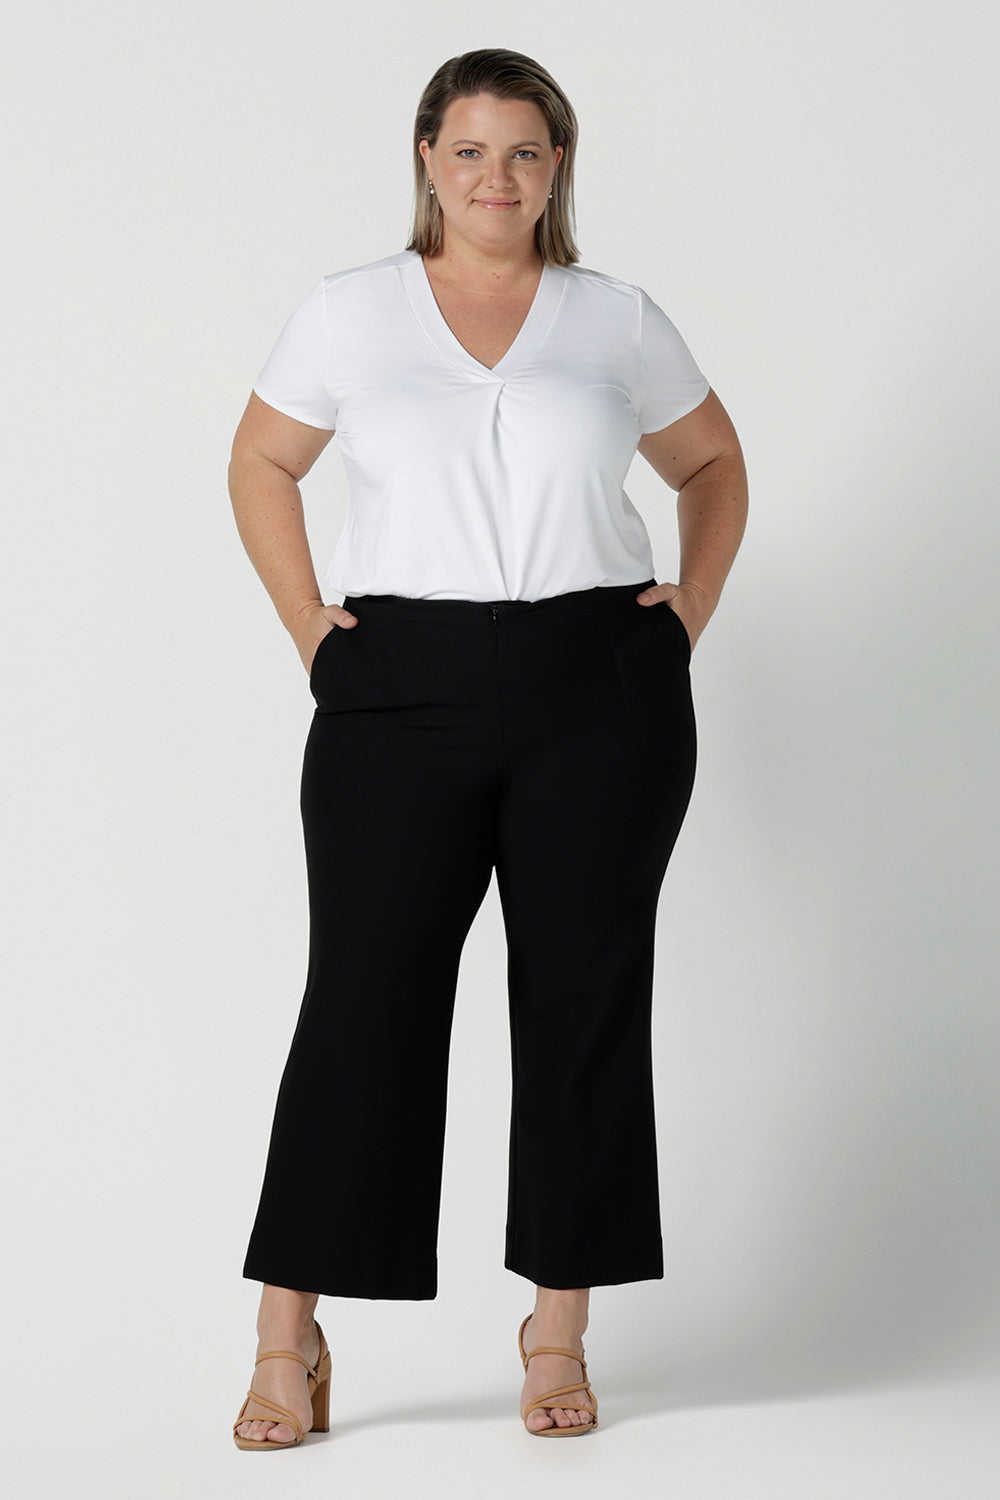 Great pants for curvy women, these flared leg, cropped pants are tailored for smart casual office wear. Worn with a V-neck, short sleeve top in white, and shown on a size 18 woman, these plus size black pants are made in Australia by Australian and New Zealand women's clothing brand, Leina & Fleur. Shop quality pants in sizes 8 to 24 in their online fashion boutique!